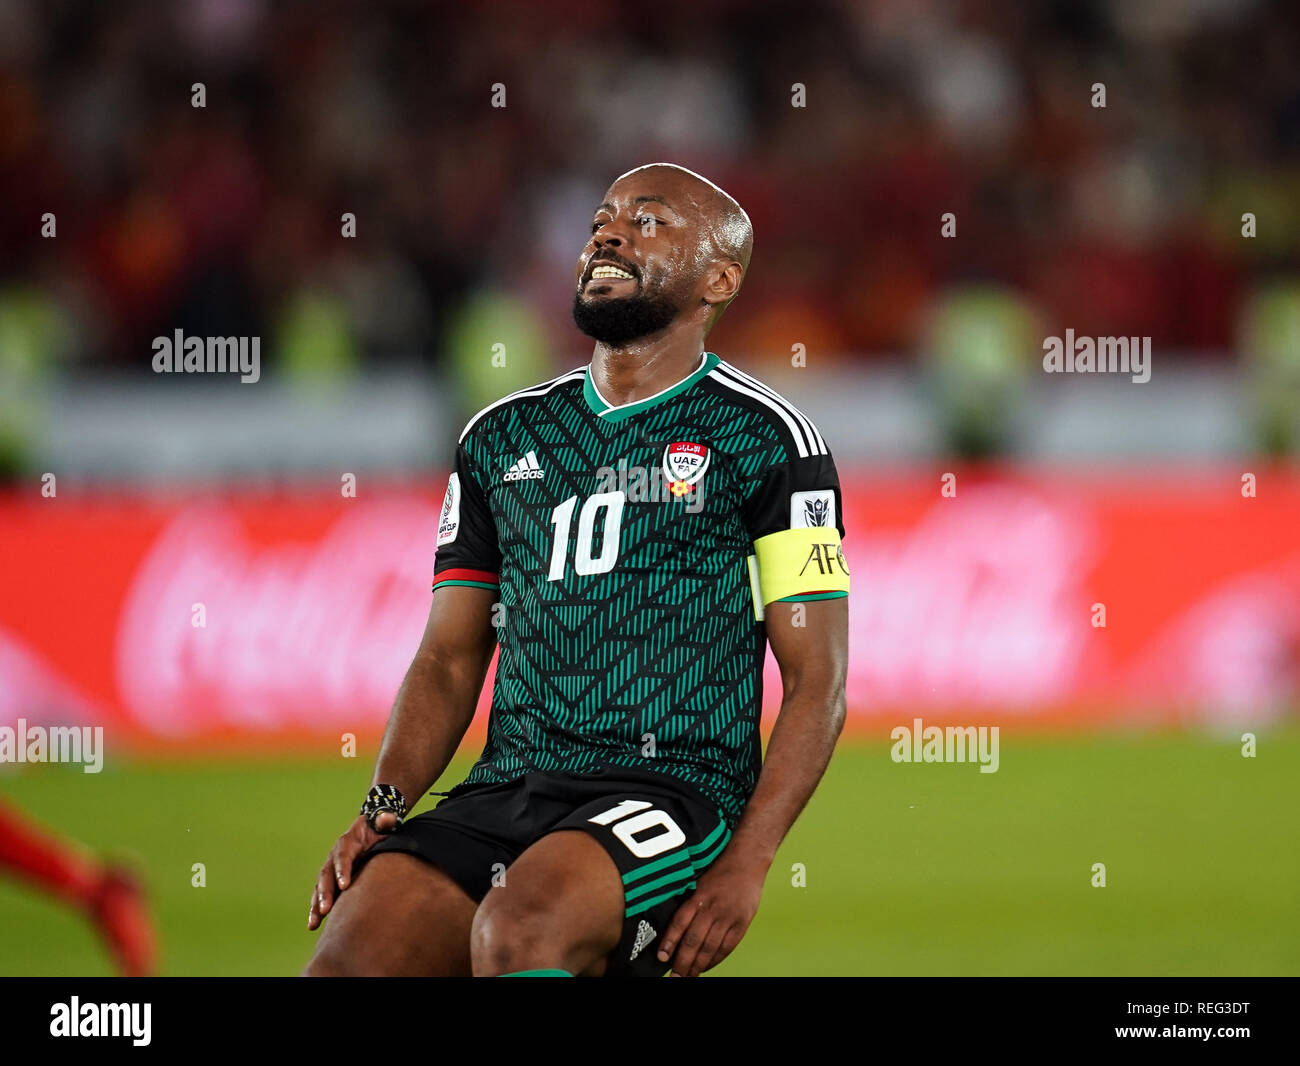 January 21, 2019 : Ismail Matar of United Arab Emirates after missing the ball during United Arab Emirates v Kyrgyzstan at the Zayed Sports City Stadium in Abu Dhabi, United Arab Emirates, AFC Asian Cup, Asian Football championship. Ulrik Pedersen/CSM. Stock Photo